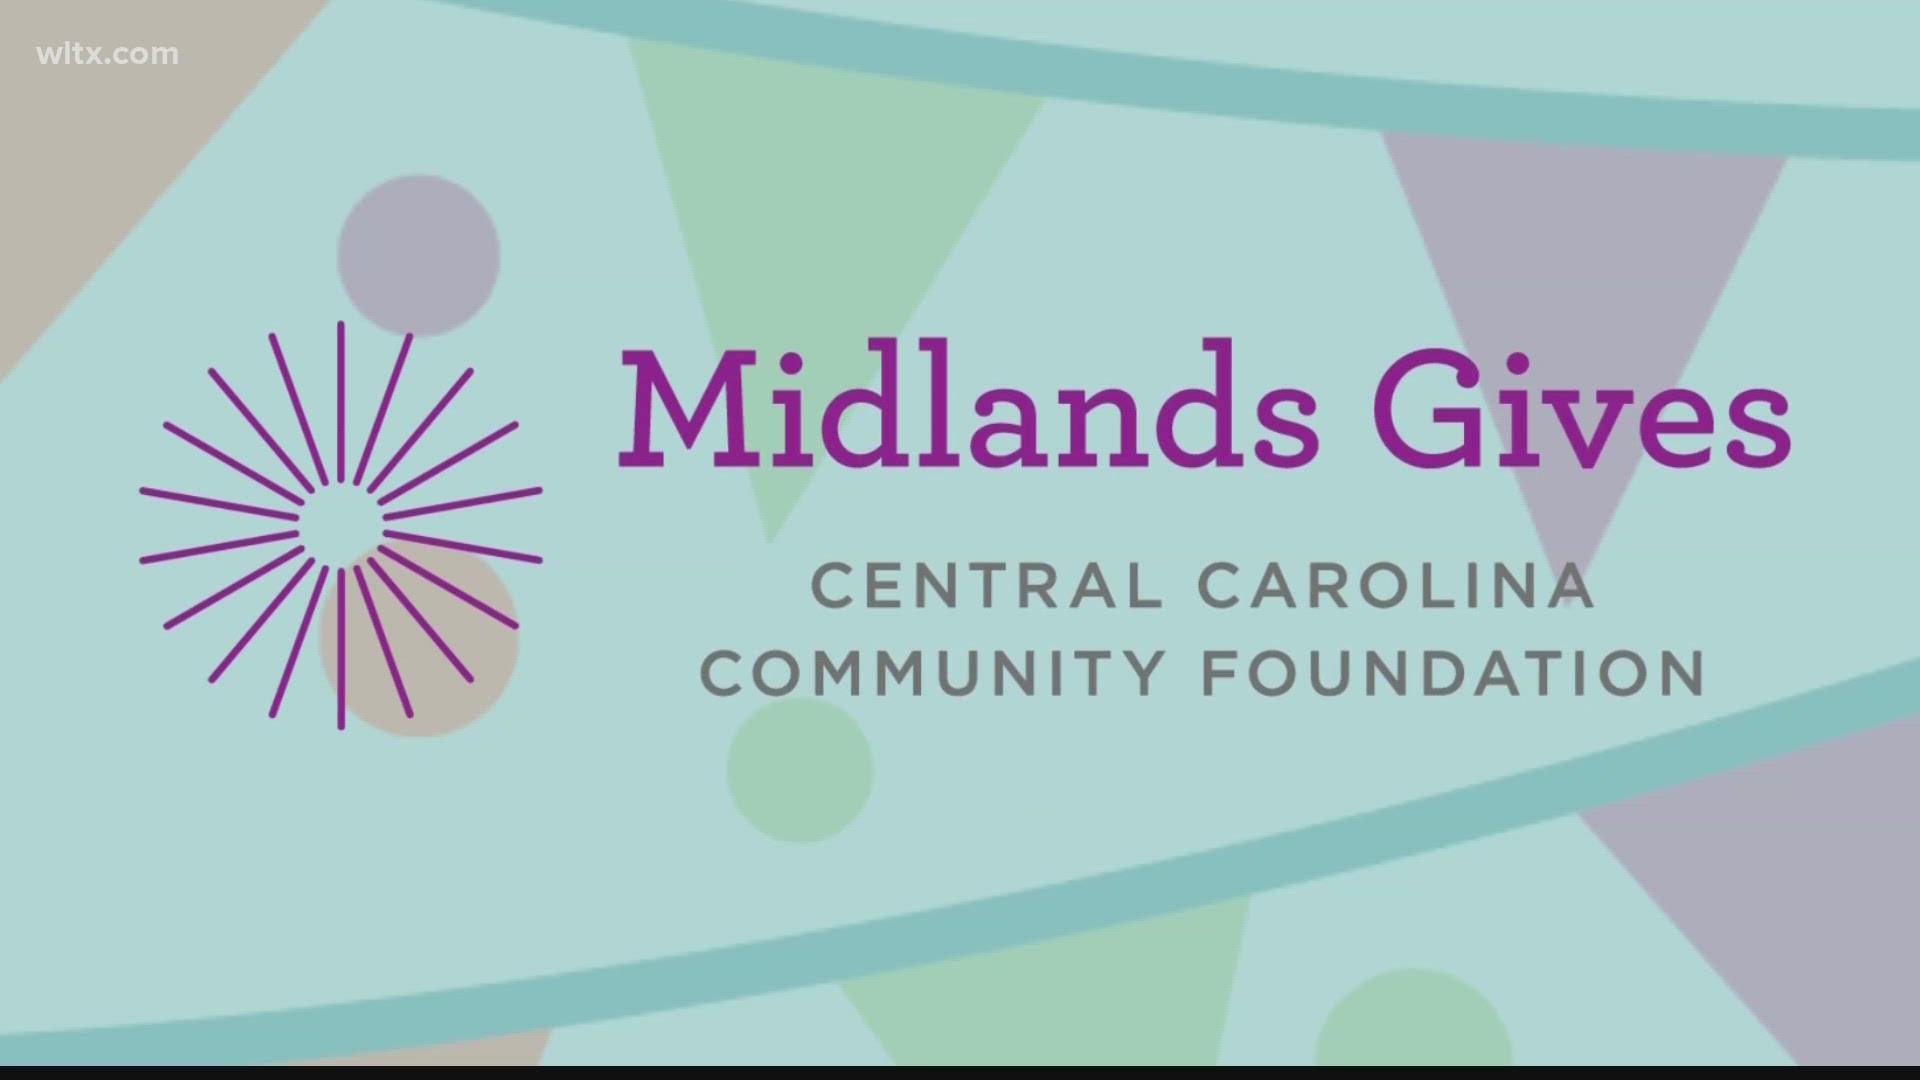 Midlands Gives -- the annual fundraising event to raise money and awareness for local nonprofits -- is Tuesday, May 2.